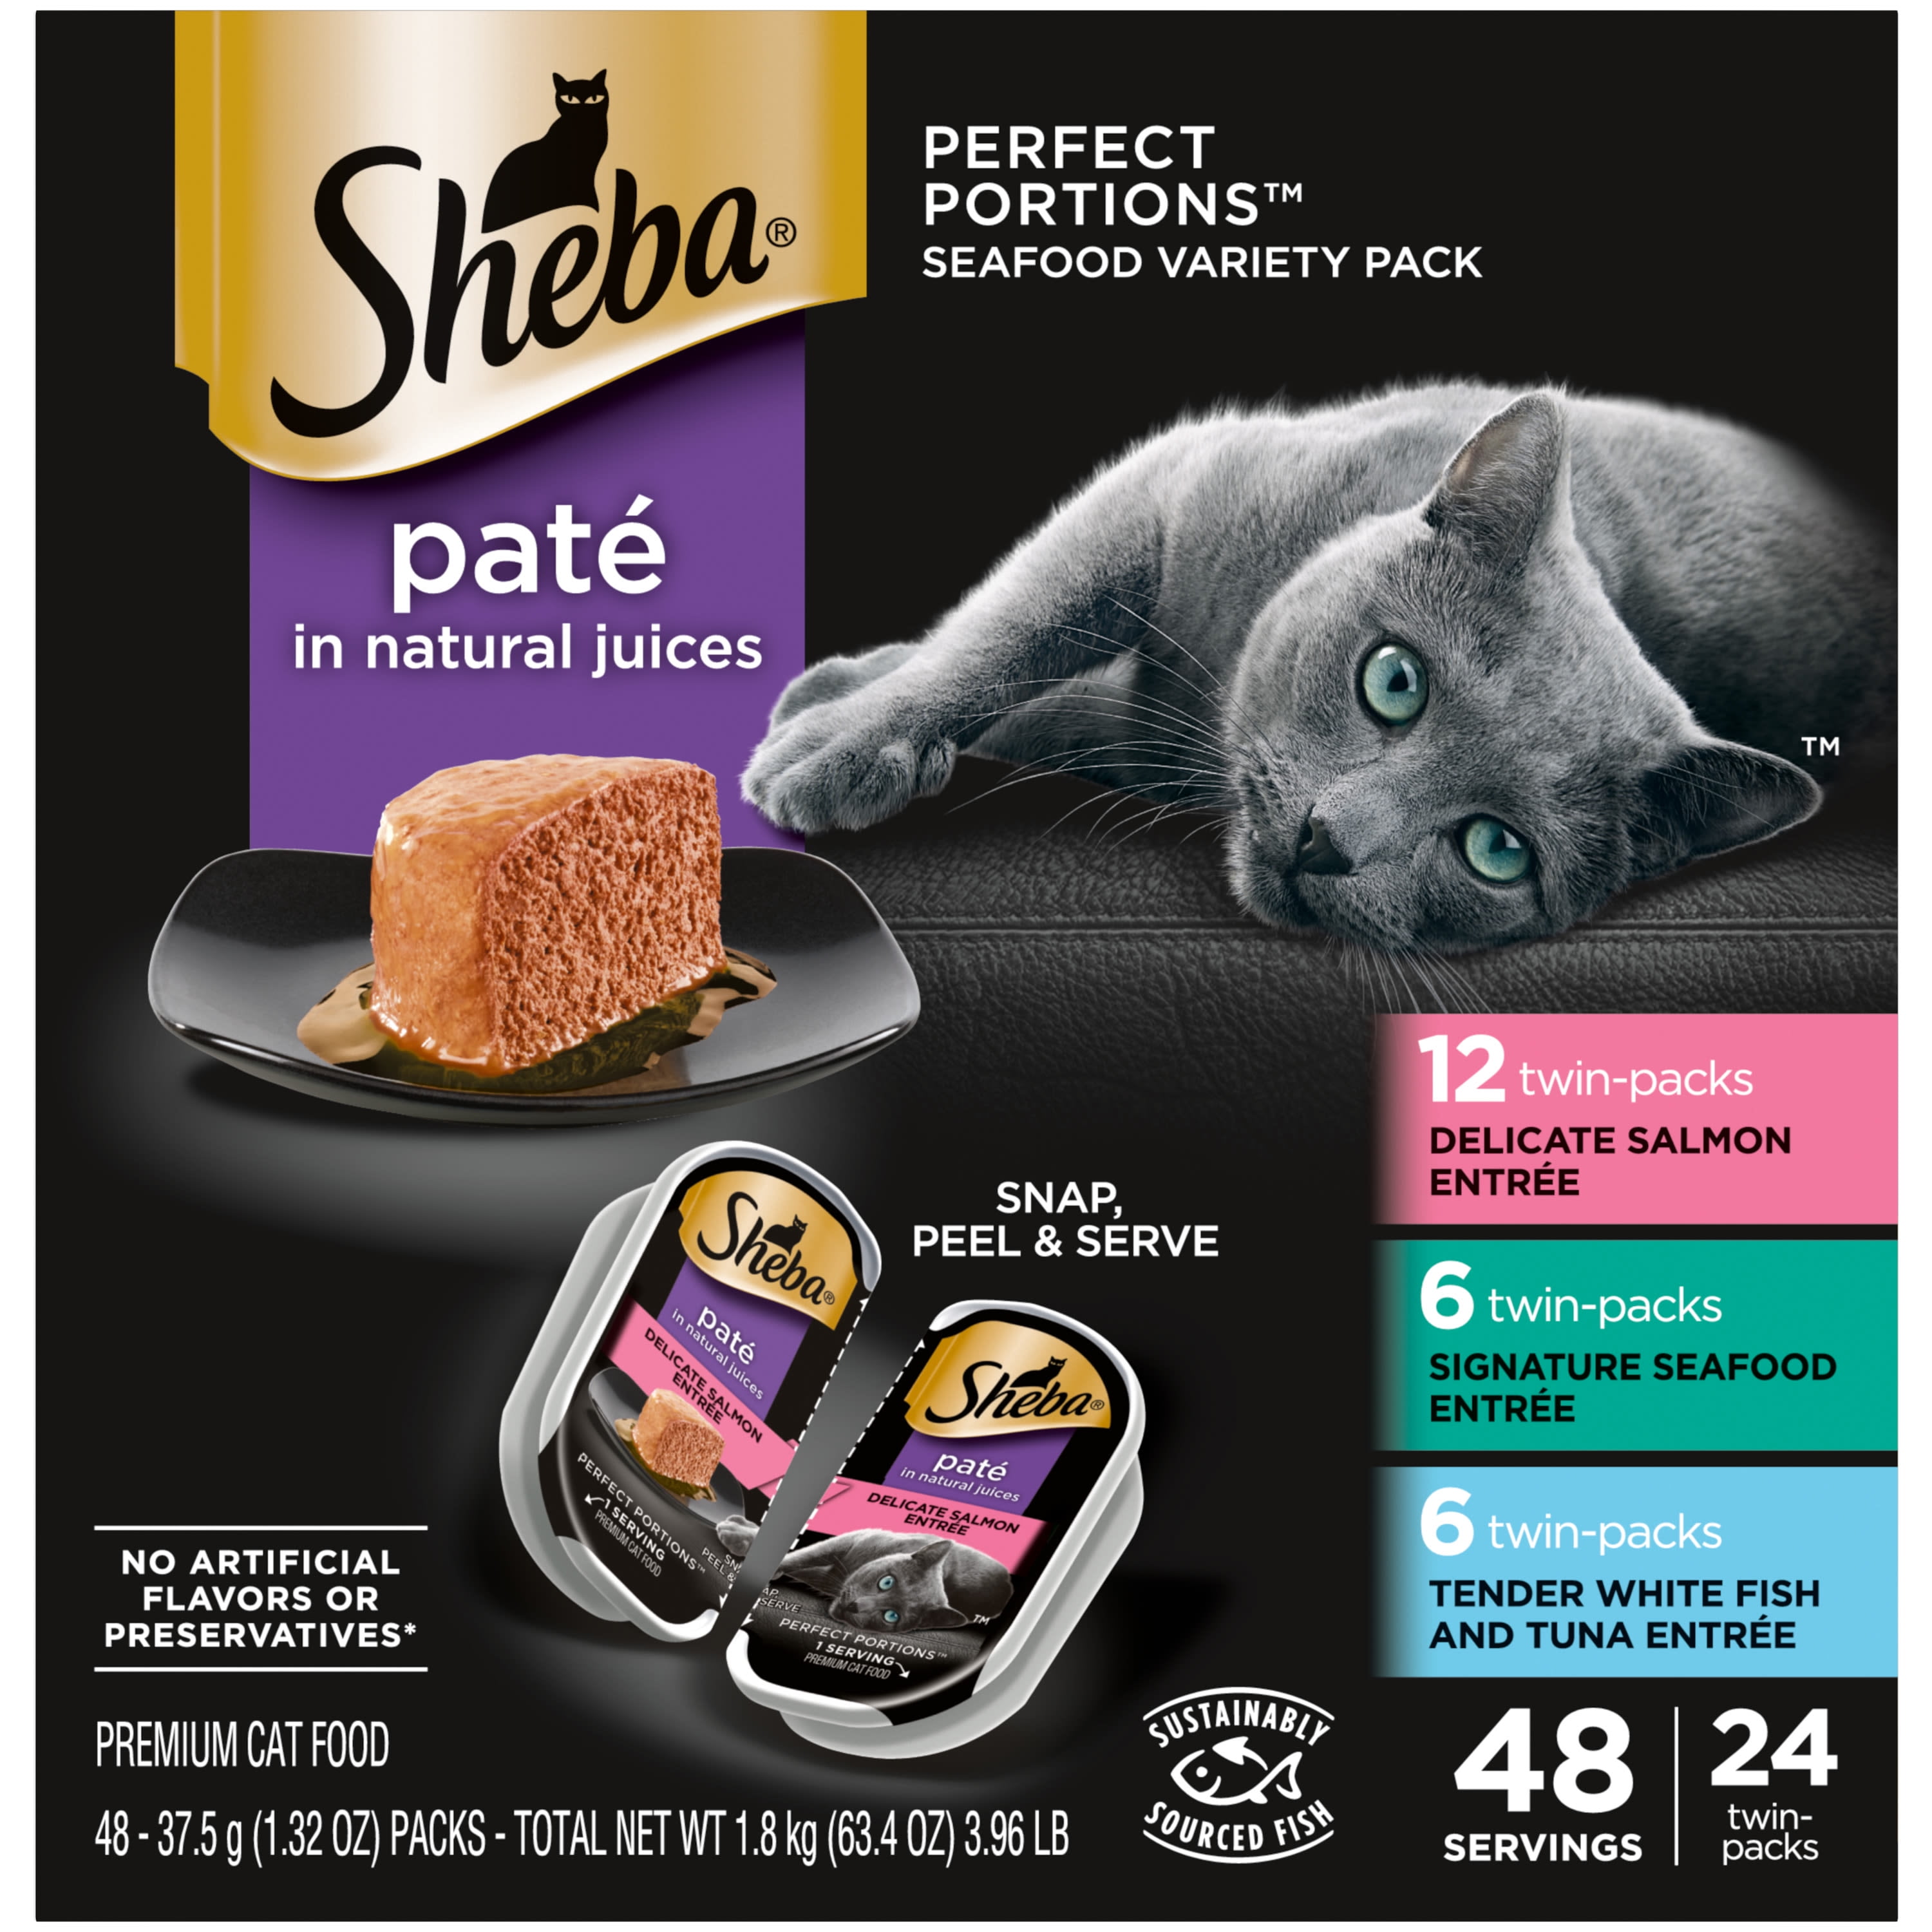 SHEBA Wet Cat Food Pate Variety Pack, Signature Seafood, Delicate Salmon and Tender Whitefish & Tuna Entrees, 2.6 oz. PERFECT PORTIONS Twin-Pack Trays